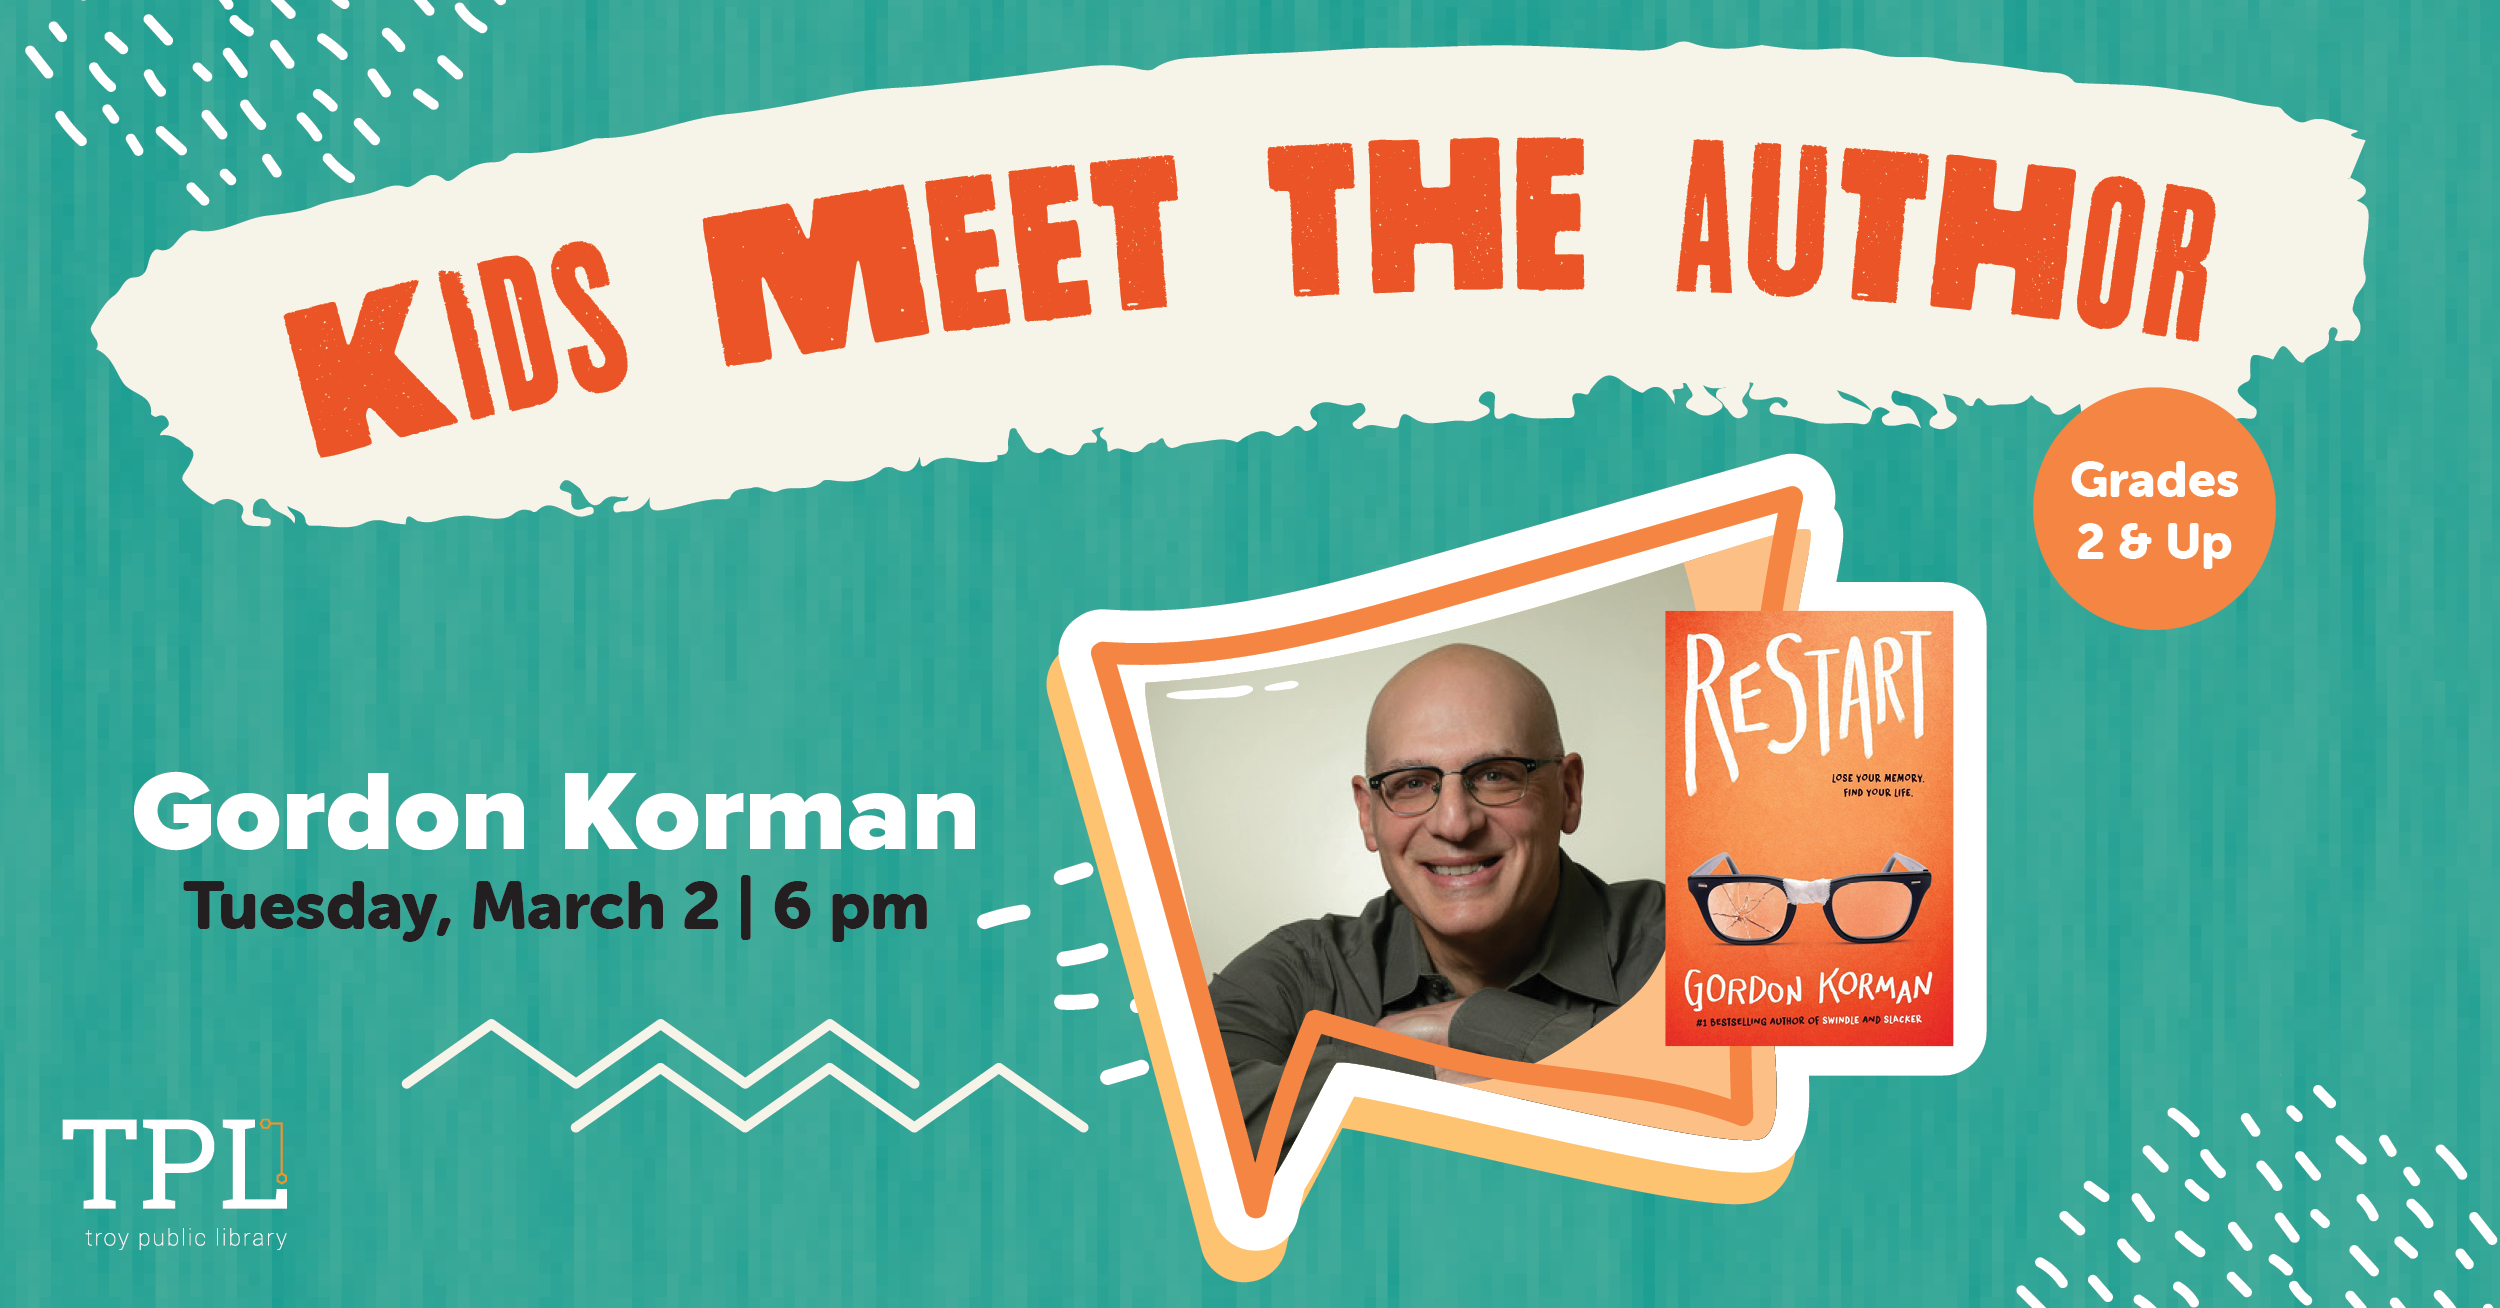 Kids Meet the Author. Gordon Korman Tuesday, March 2 at 6pm. Grades 2 and up